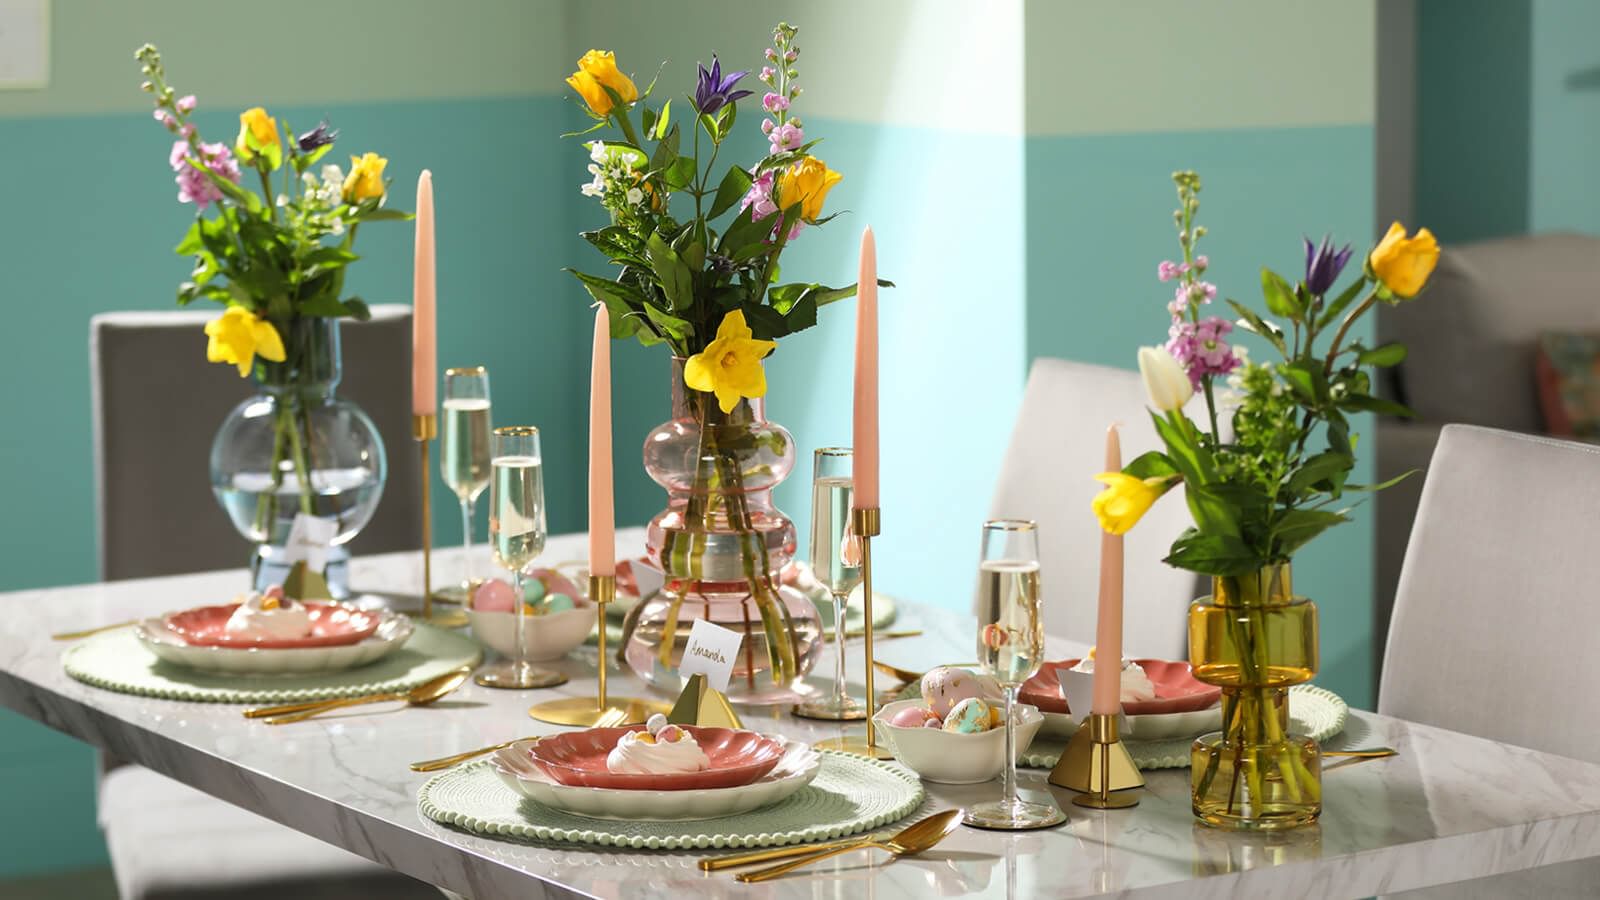 Chic ideas for styling contemporary Easter décor